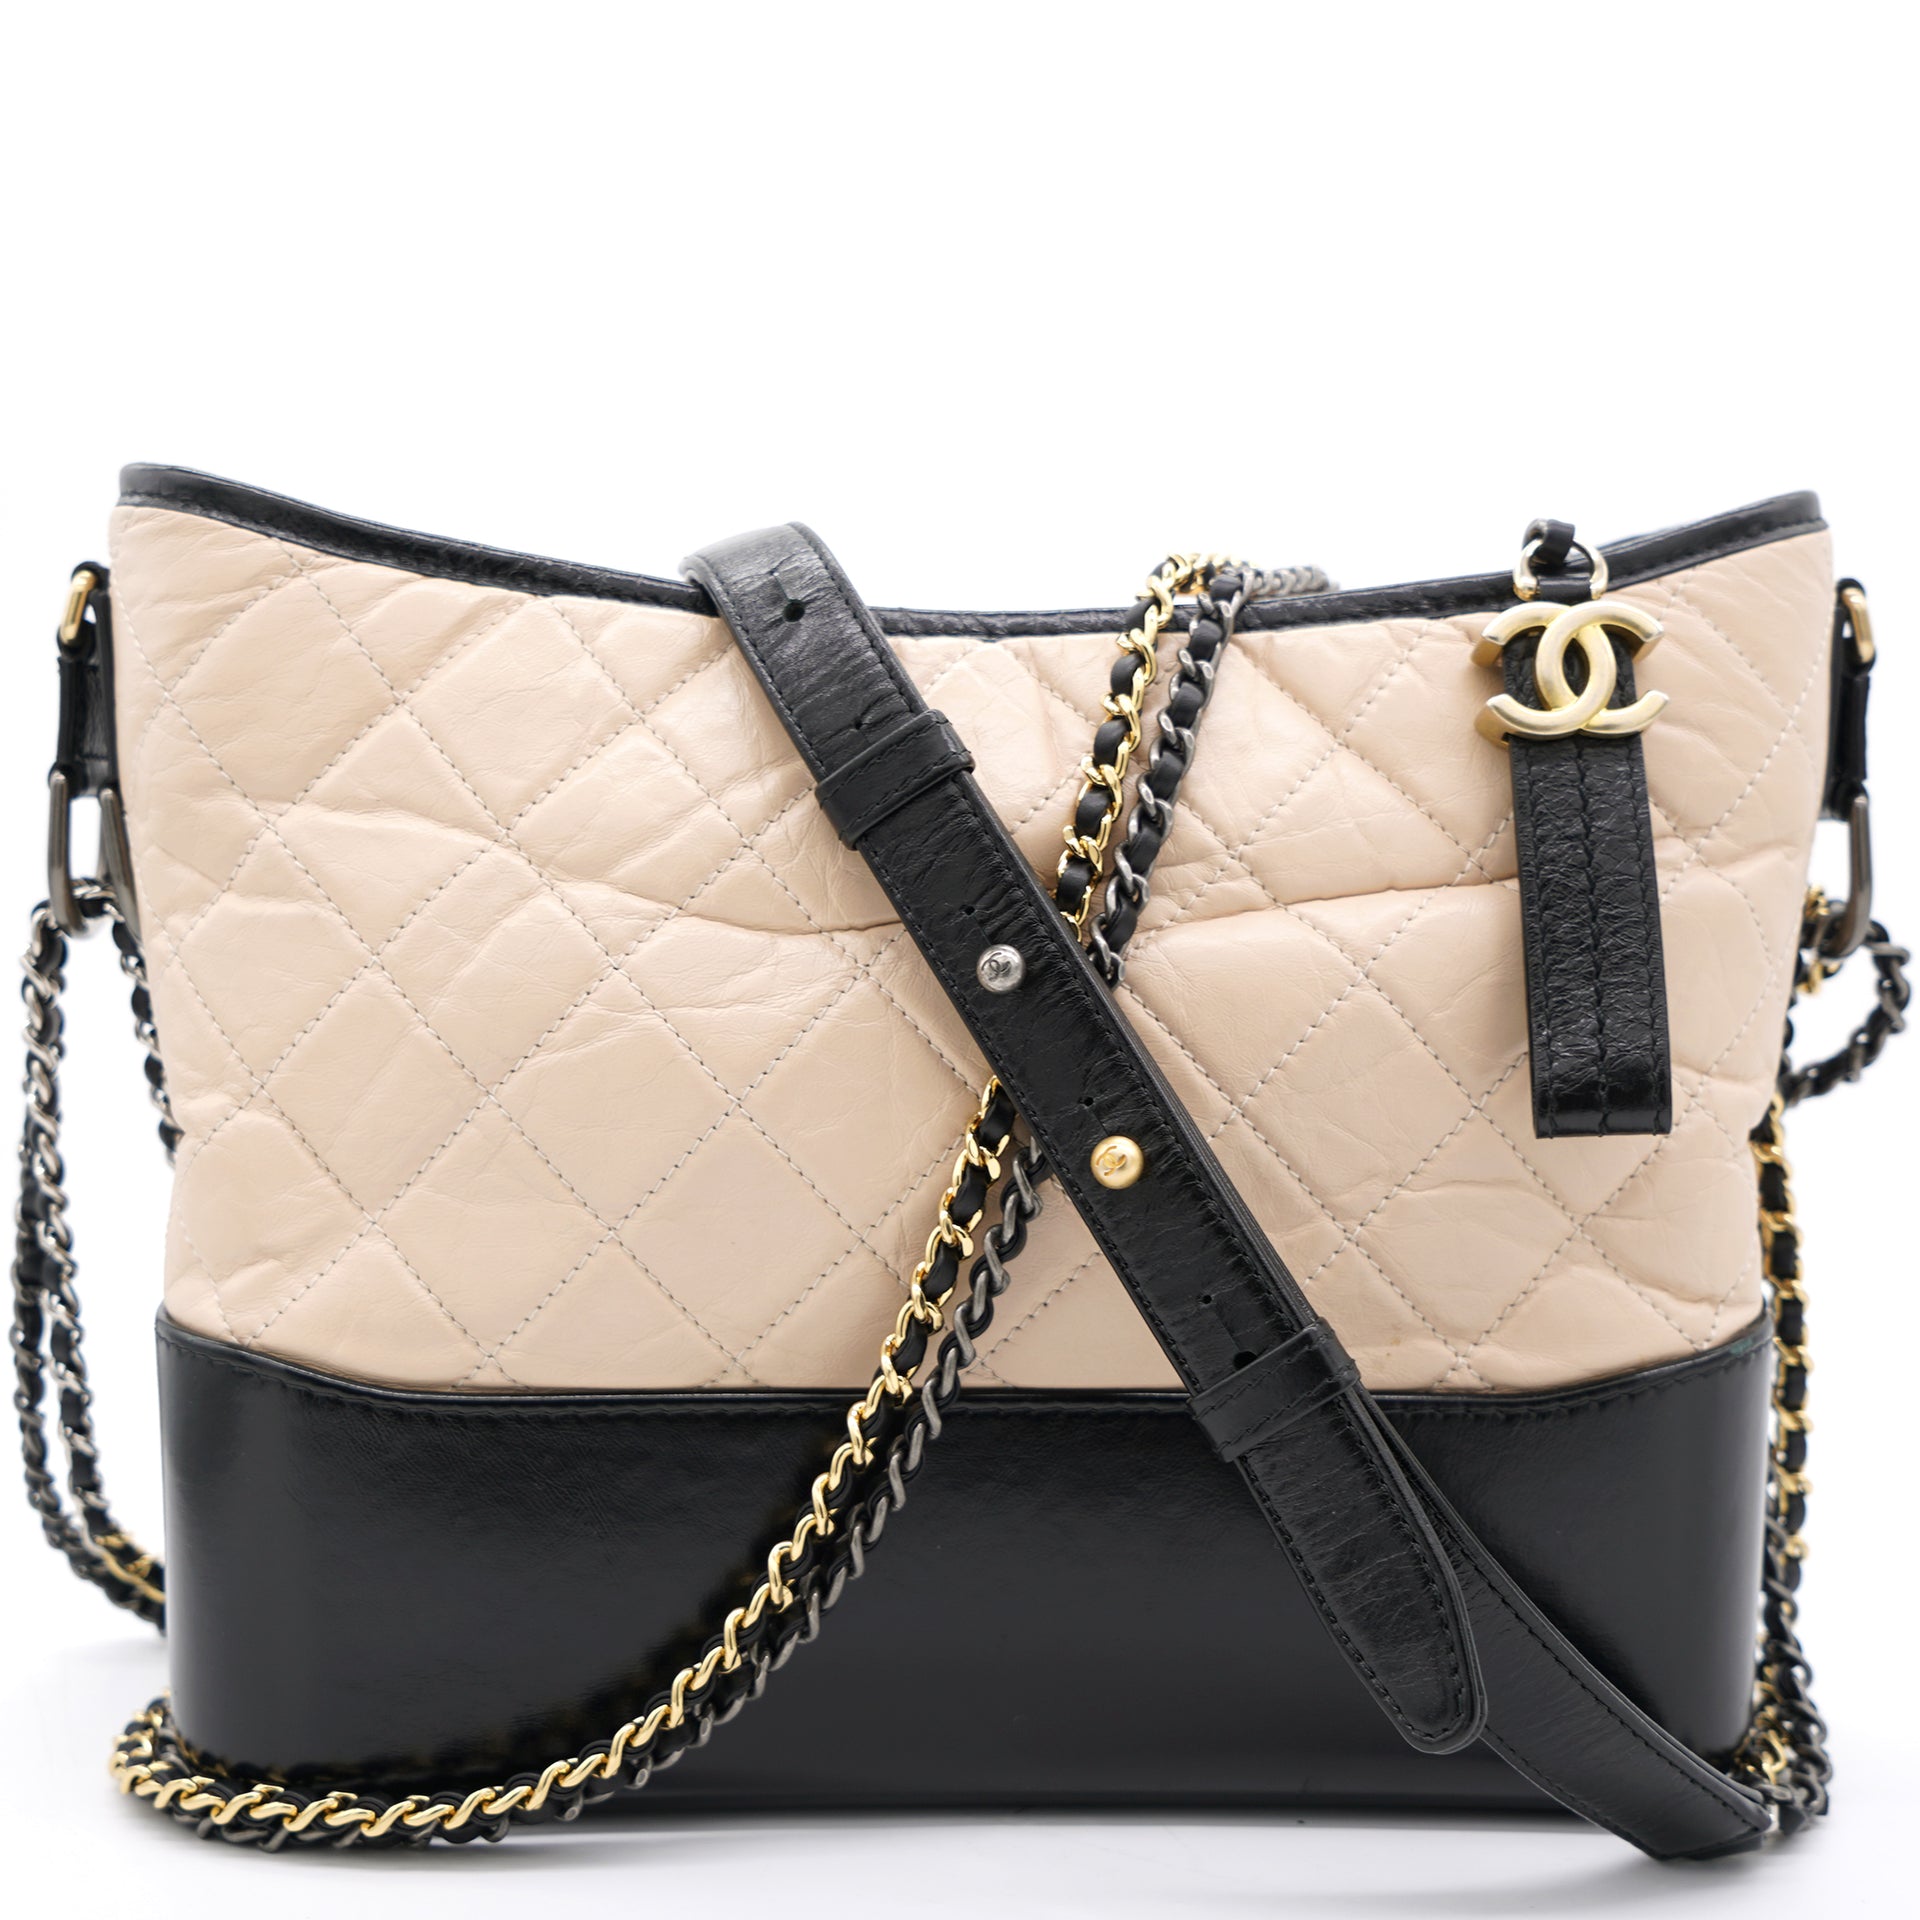 Small Gabrielle Hobo Bag in Beige and Black